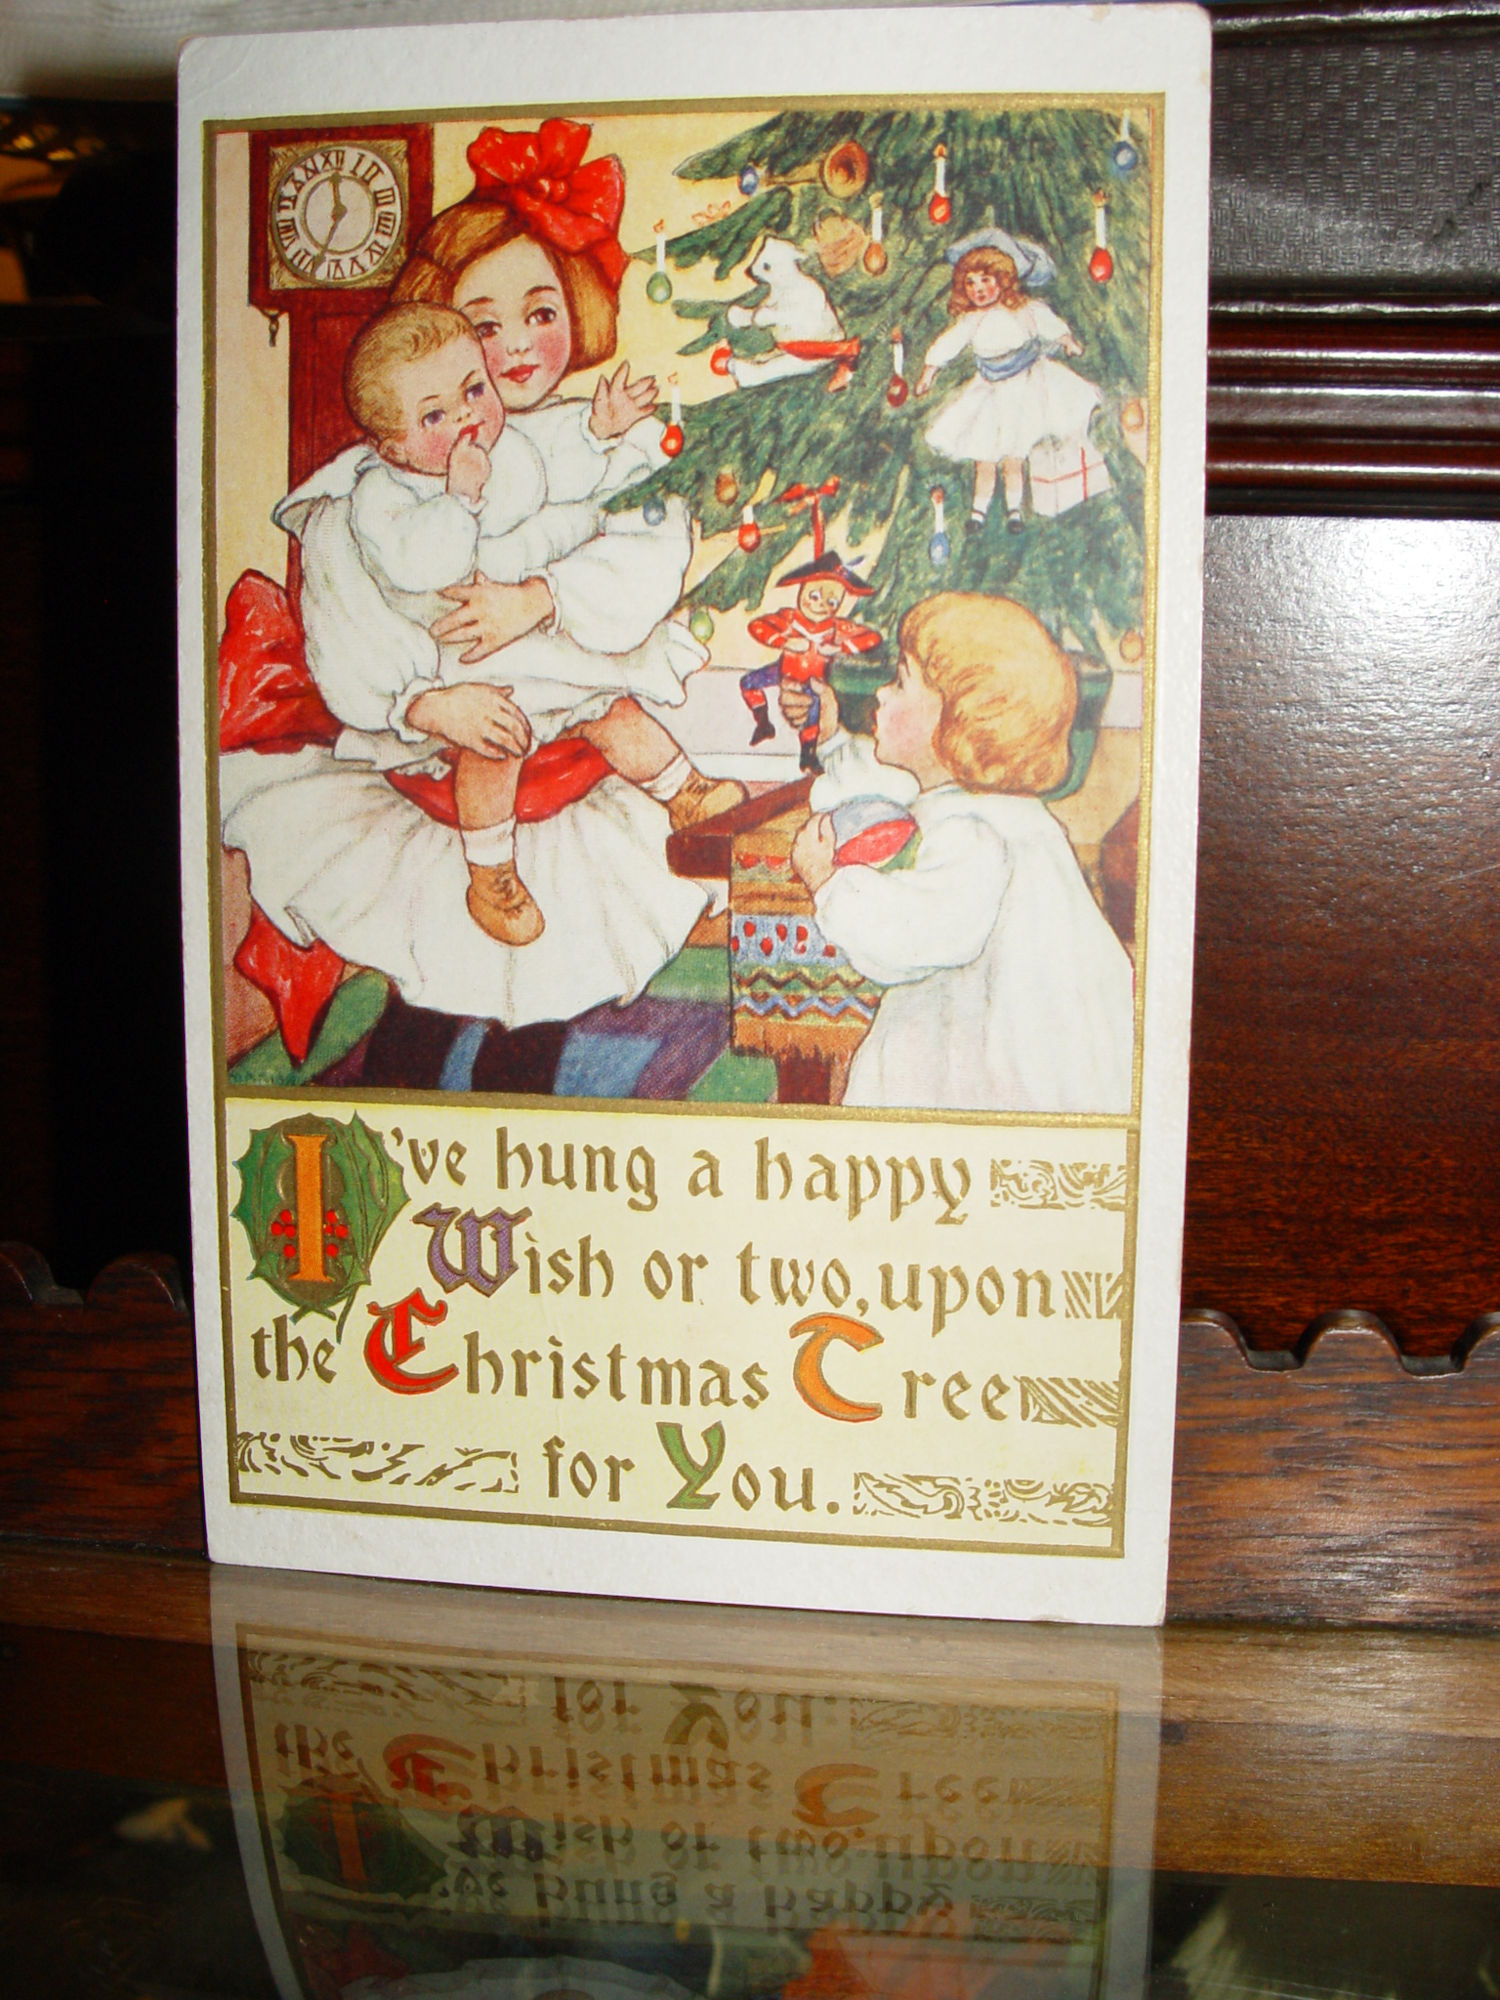 1911 Christmas
                                                Post Card-Girl with
                                                Siblings - Marion
                                                Miller